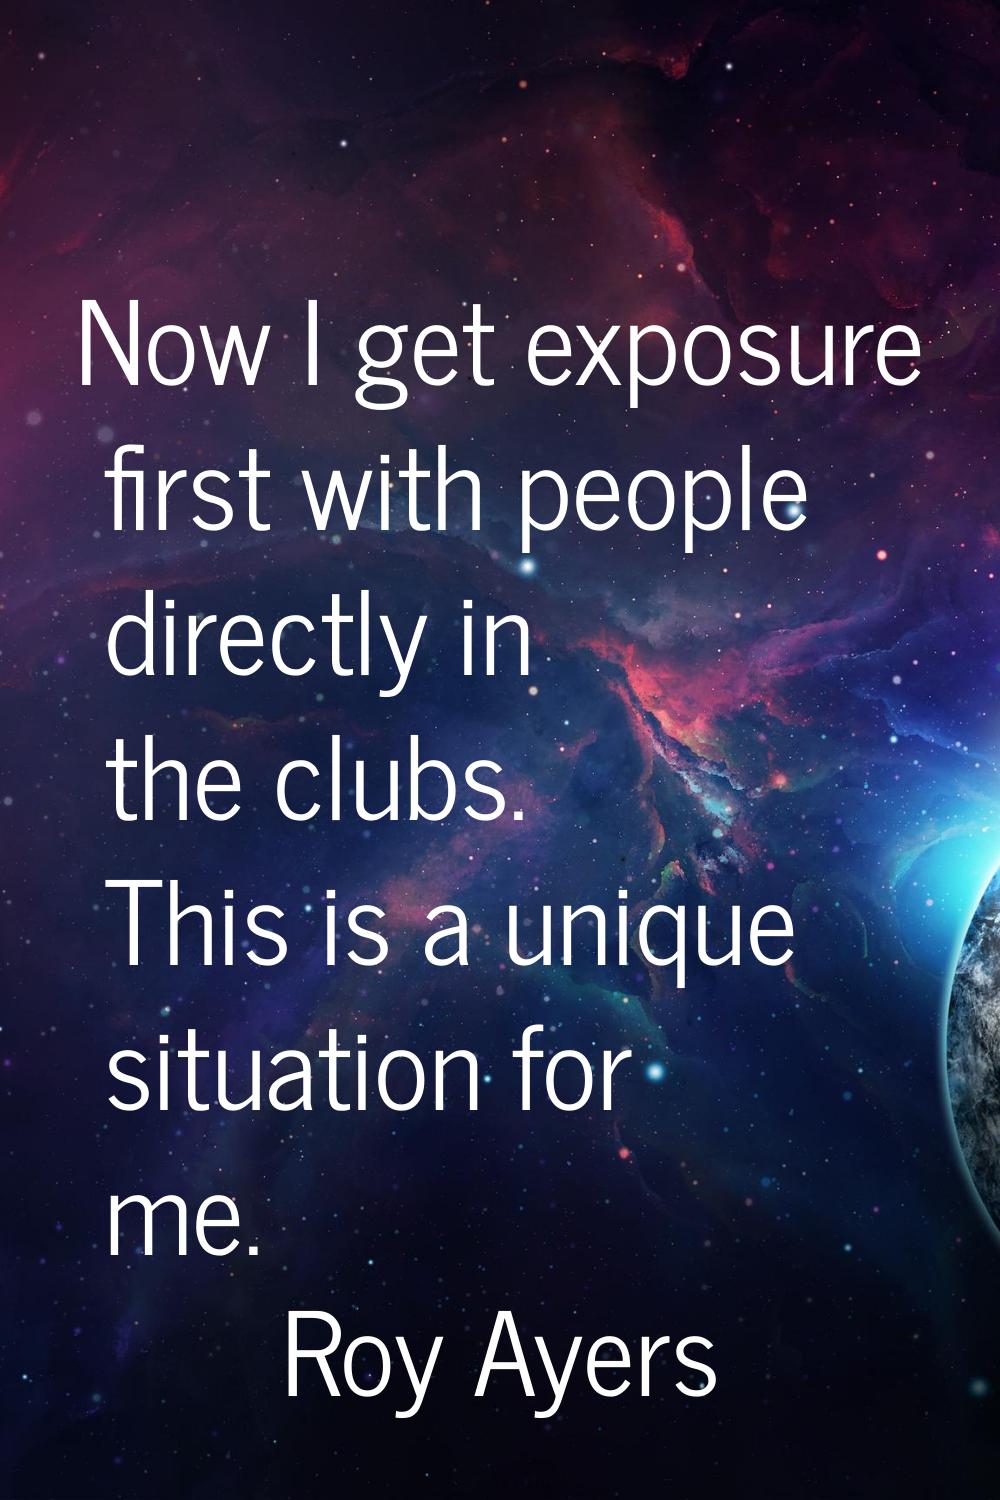 Now I get exposure first with people directly in the clubs. This is a unique situation for me.